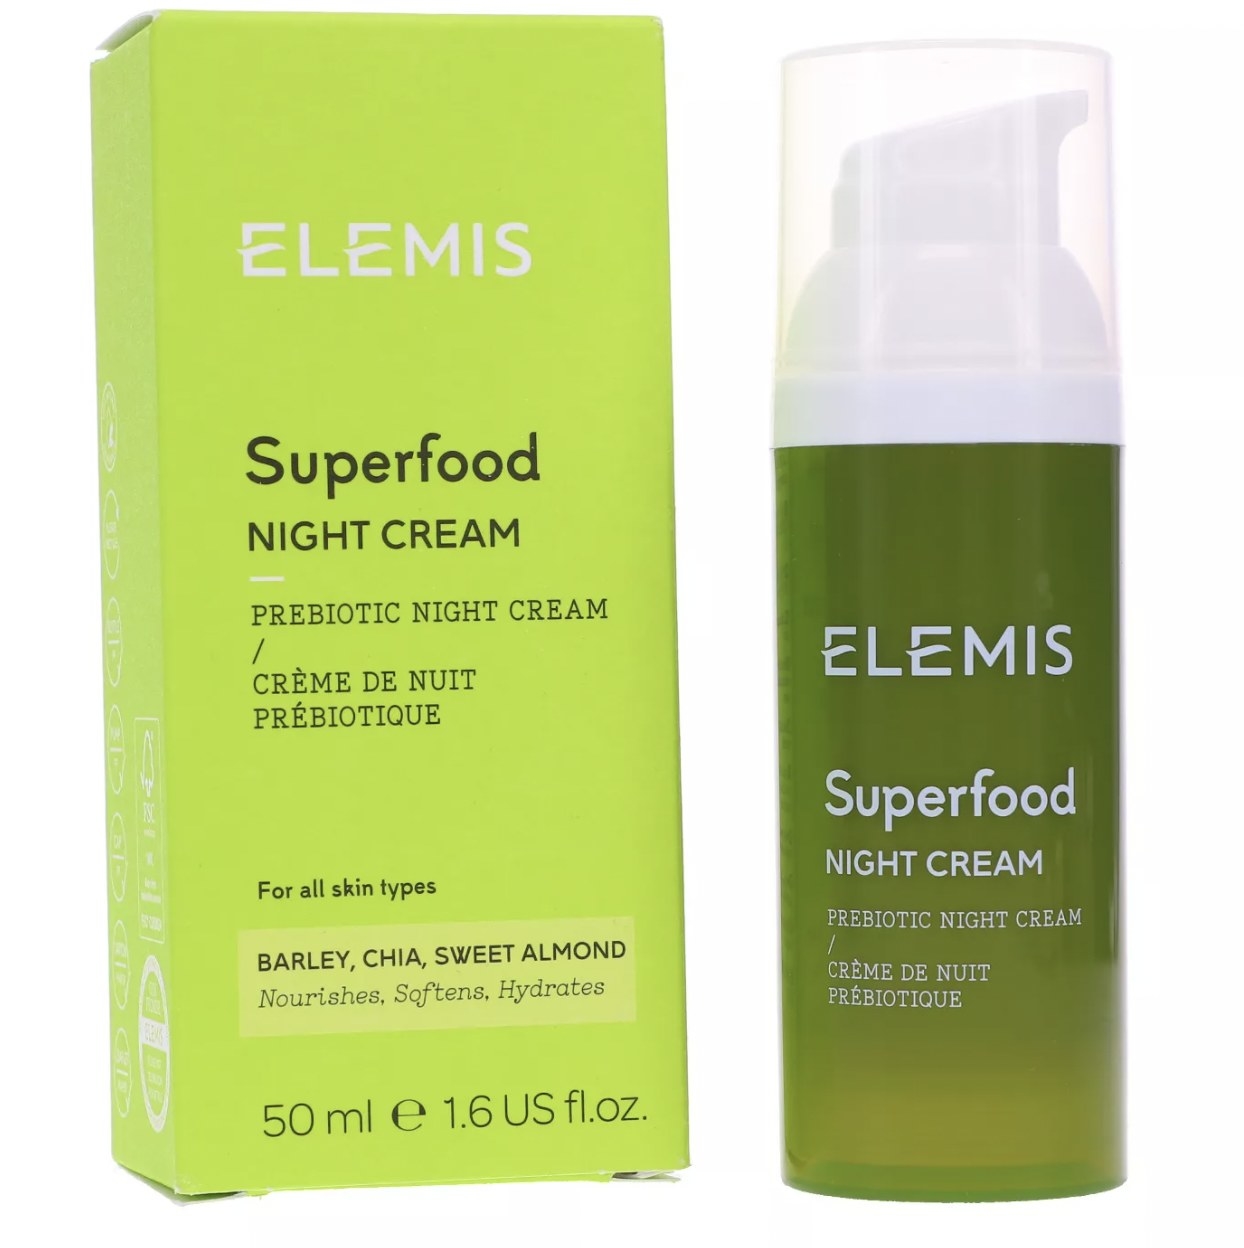 Green Elemis Superfood Night Cream packaging and bottle product shot